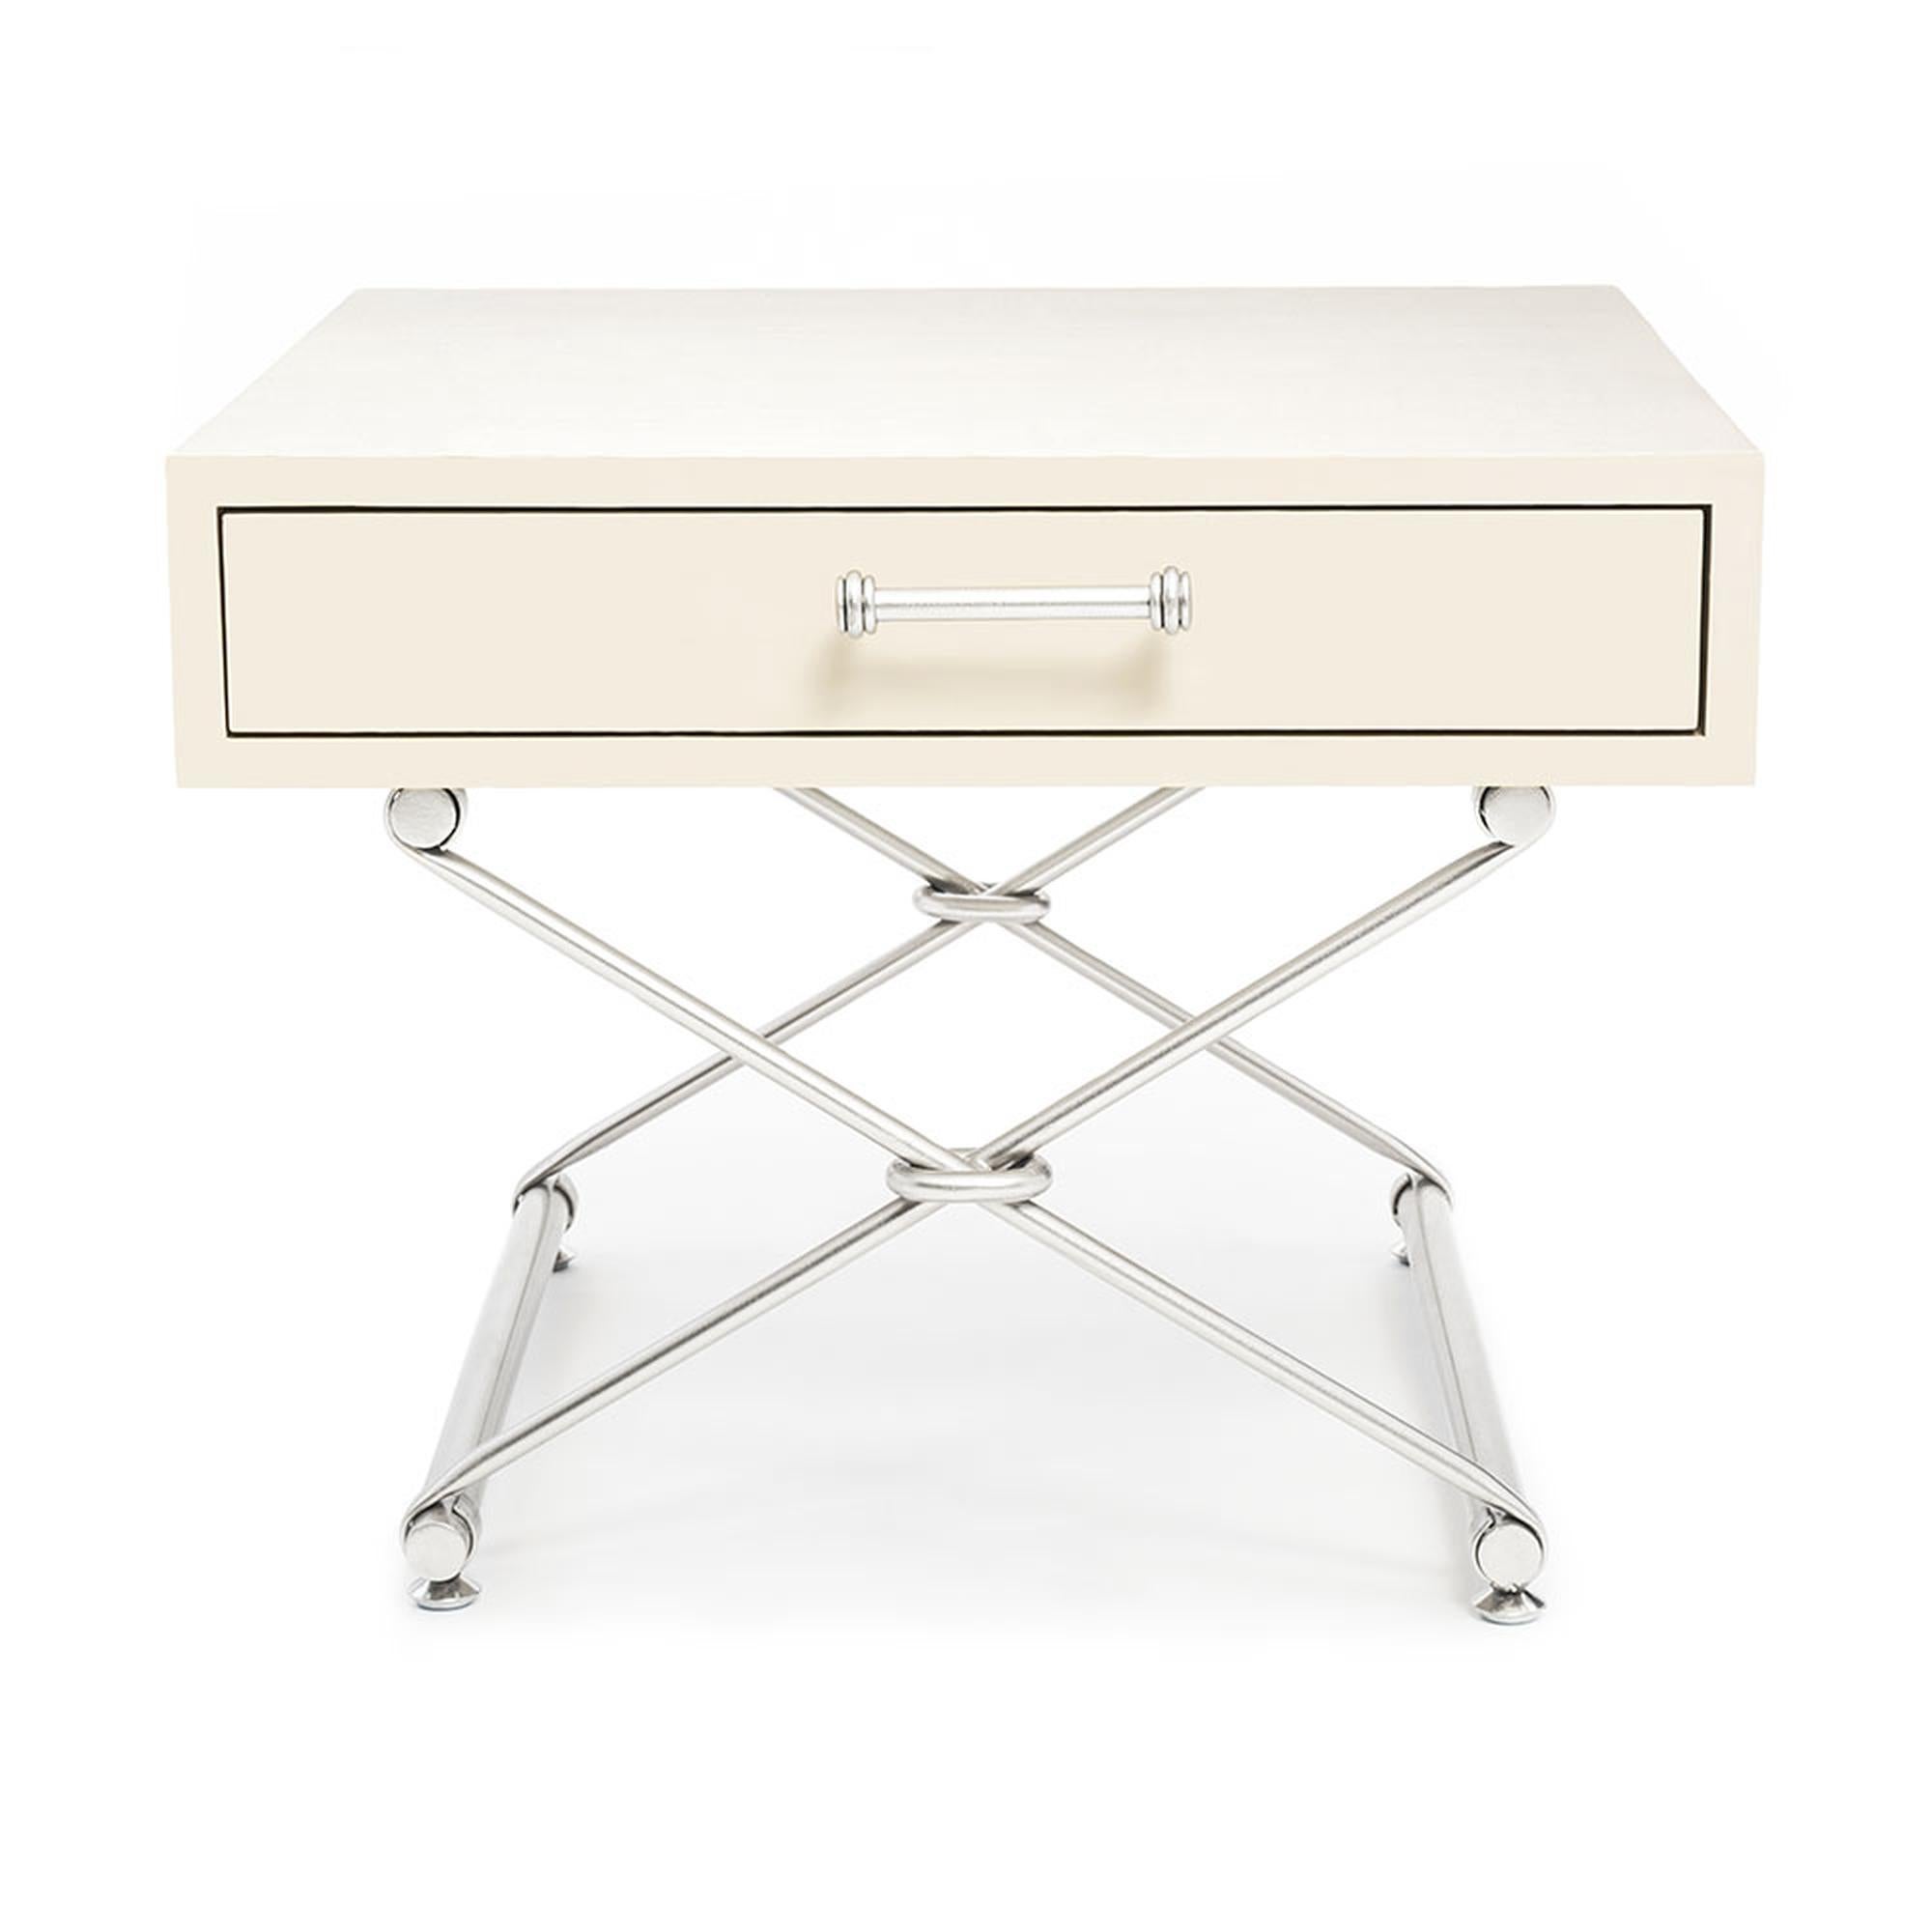 The Palisades accent table II is radiates laid-back sophistication. The table top, made of solid wood, features a soft-close drawer and sits atop a hand-gilded double-pair of legs in an “X” formation. The legs seamlessly wrap around a set of